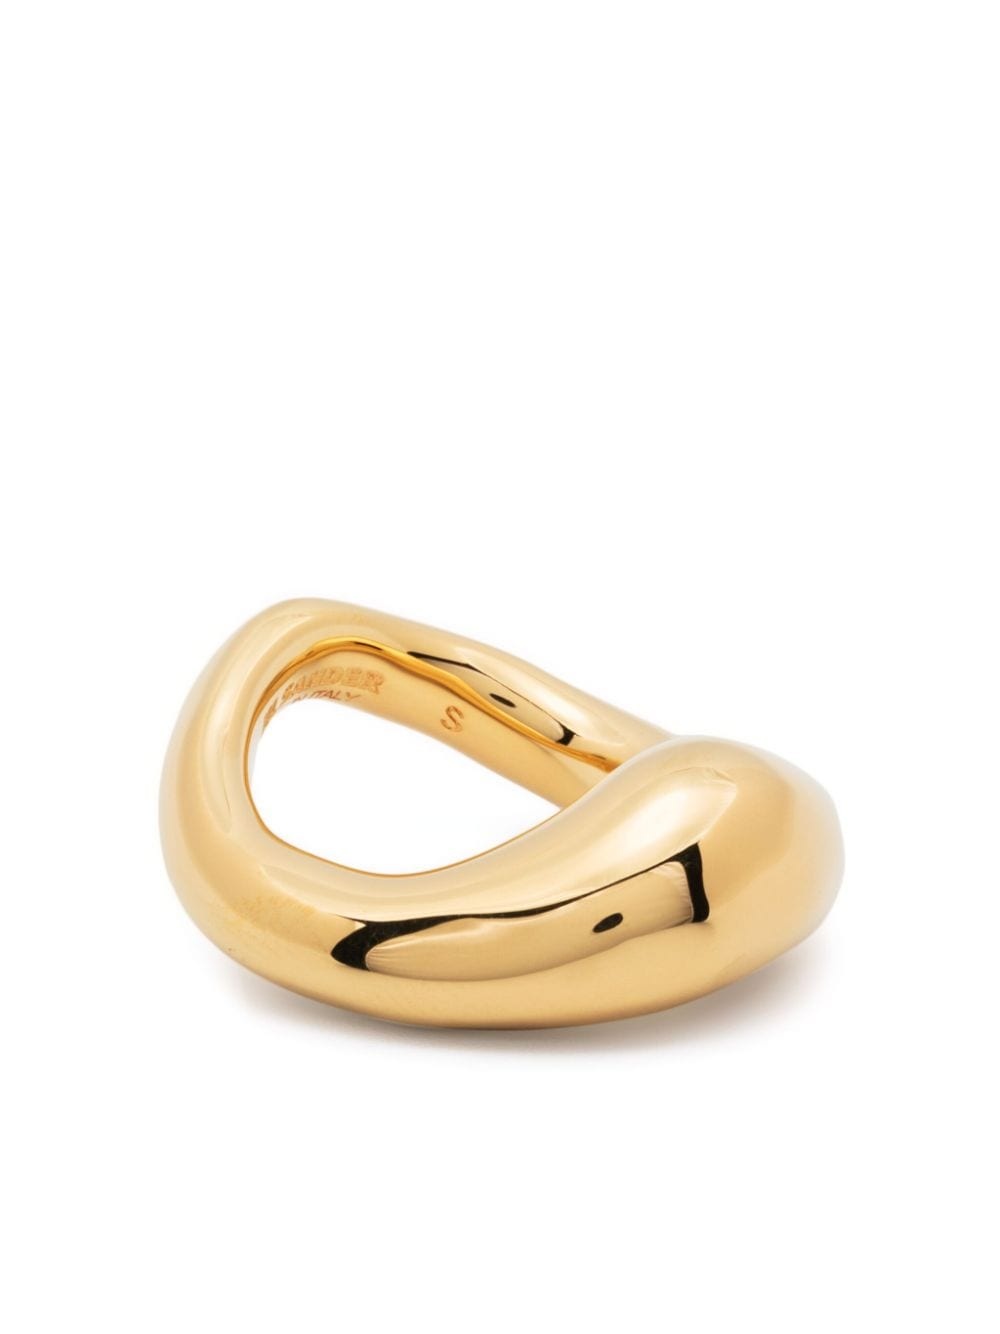 handcrafted brass ring - 1